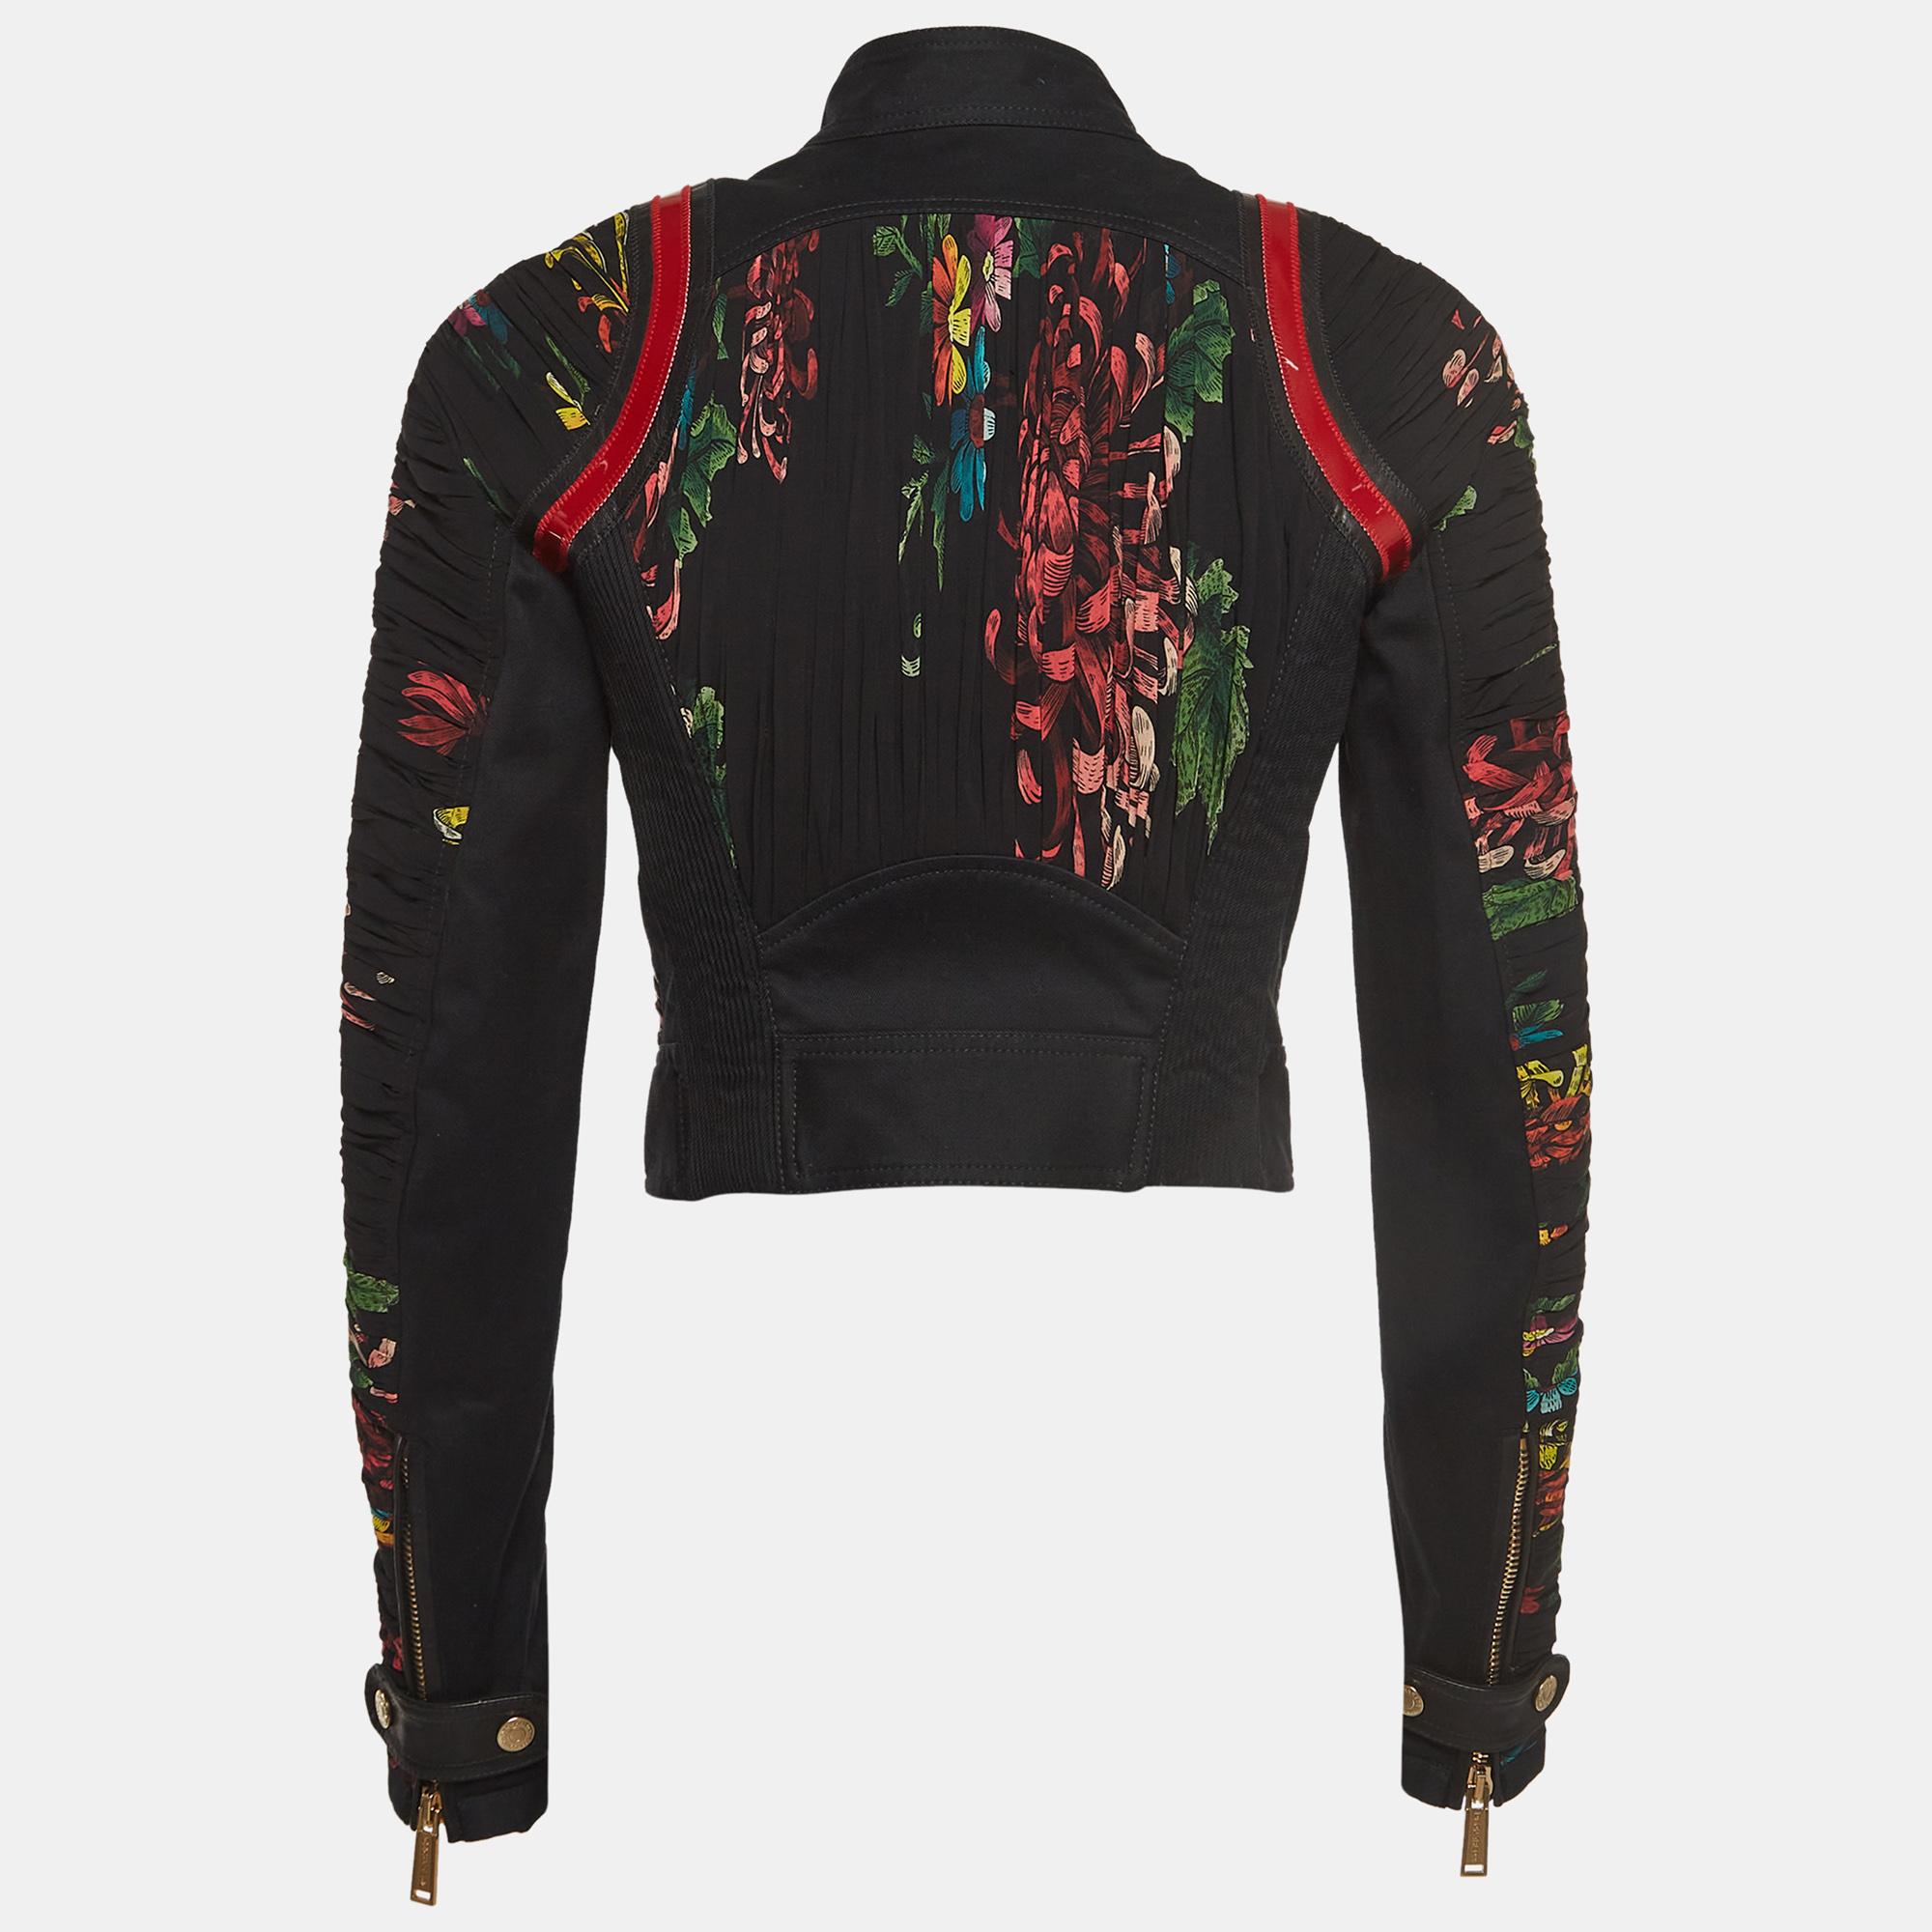 Create the most cool, chic and trendy rocket chic looks wearing this Dsquared2 jacket. Designed from leather, this luxurious piece is made in a floral print design and is secured by a zipper closure.

